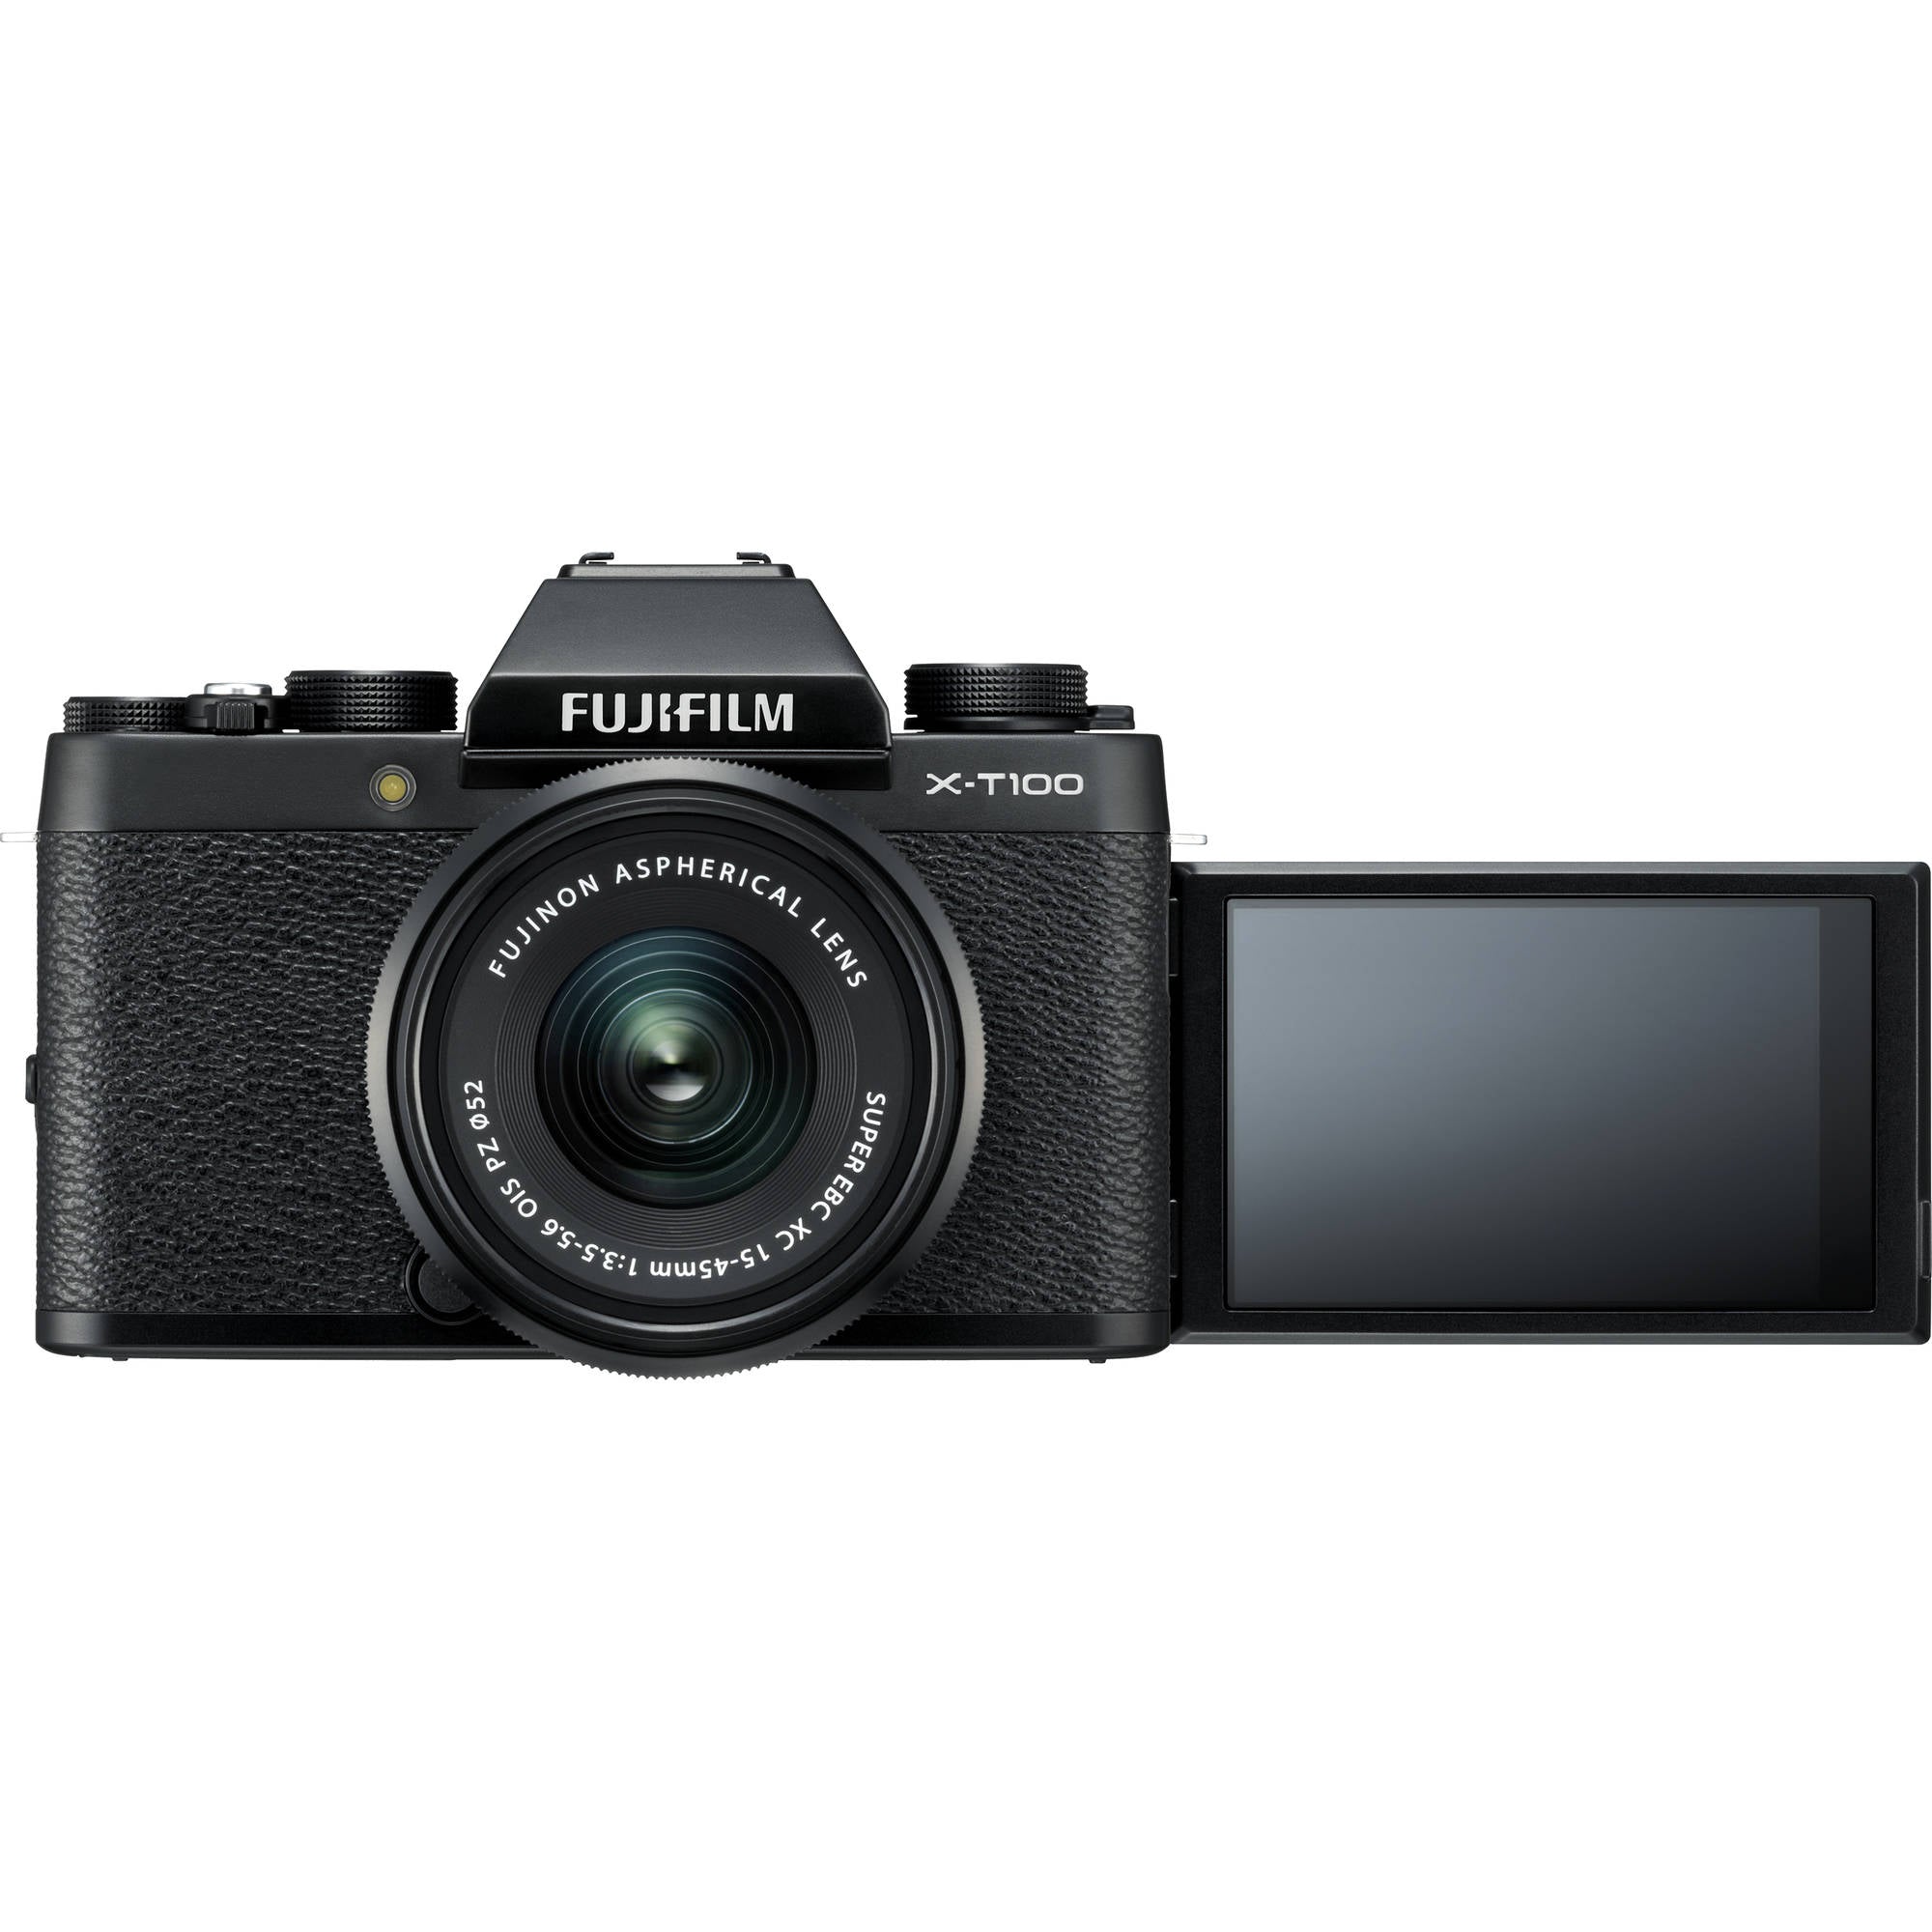 FUJIFILM X-T100 Camera with 15-45mm and 50-230mm Lens Kit (Black)